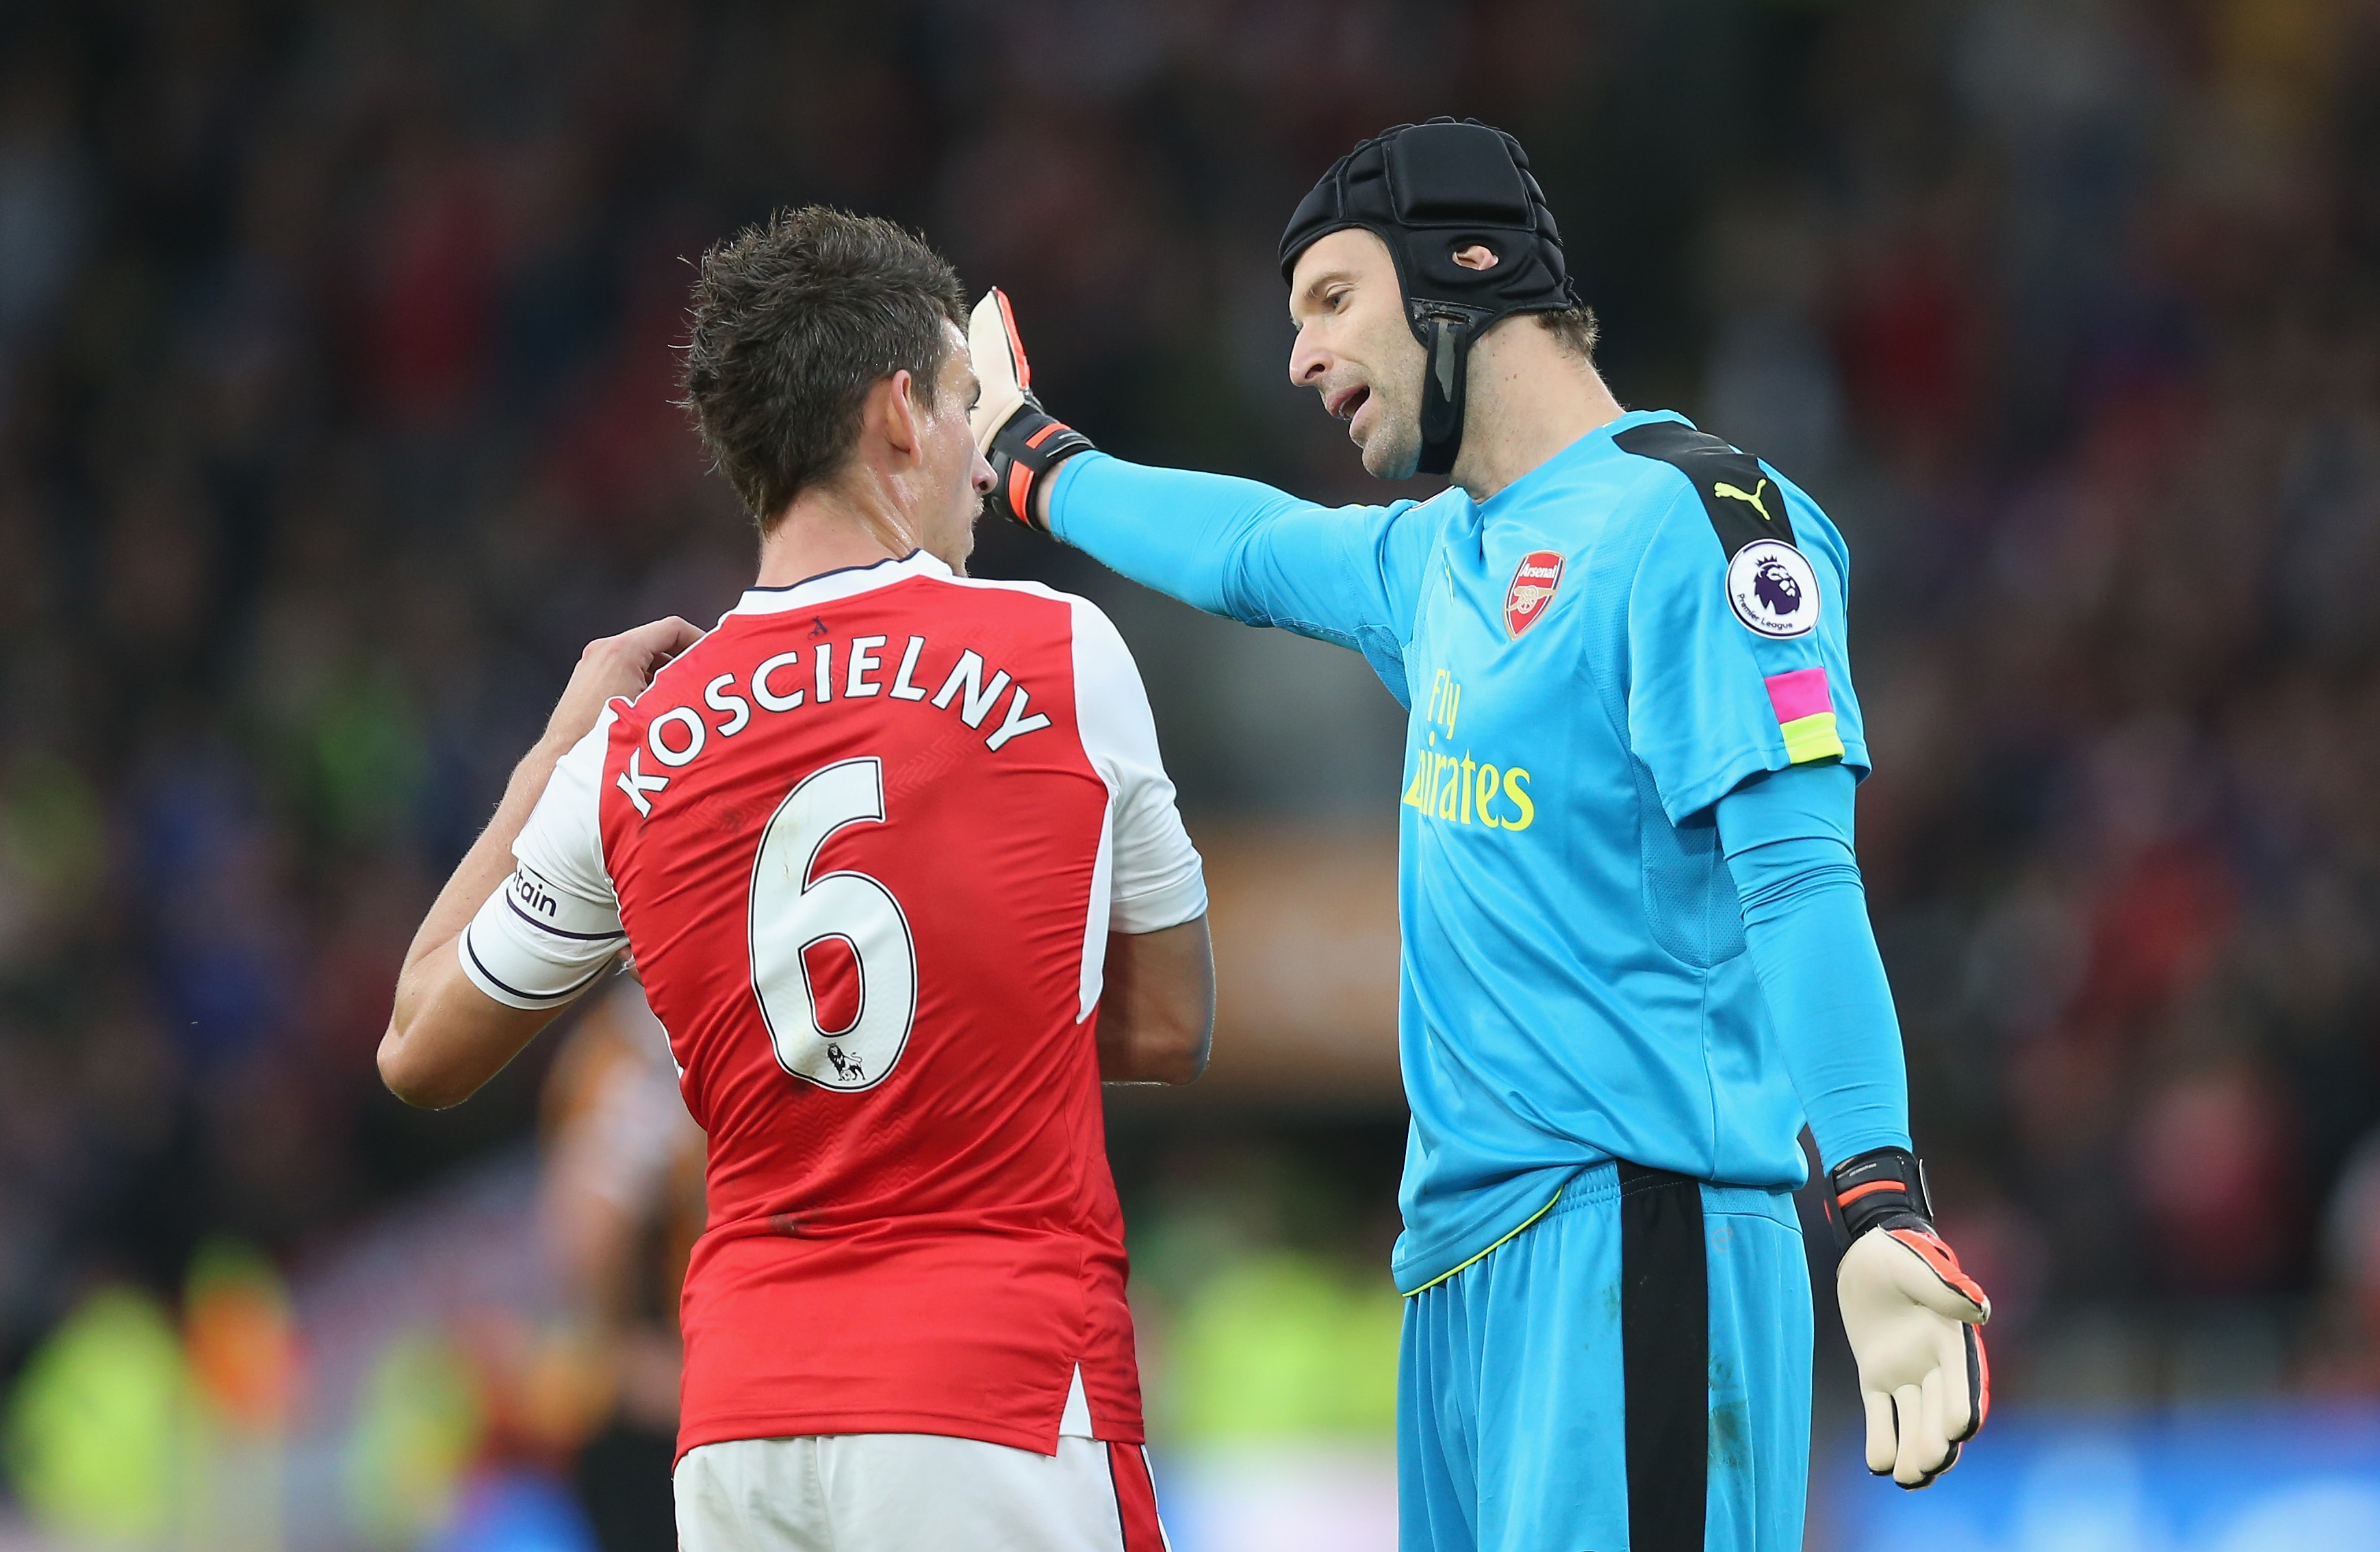 HULL, ENGLAND - SEPTEMBER 17: Laurent Koscielny of Arsenal (L) and Petr Cech of Arsenal (R) speak  during the Premier League match between Hull City and Arsenal at KCOM Stadium on September 17, 2016 in Hull, England.  (Photo by Alex Morton/Getty Images)